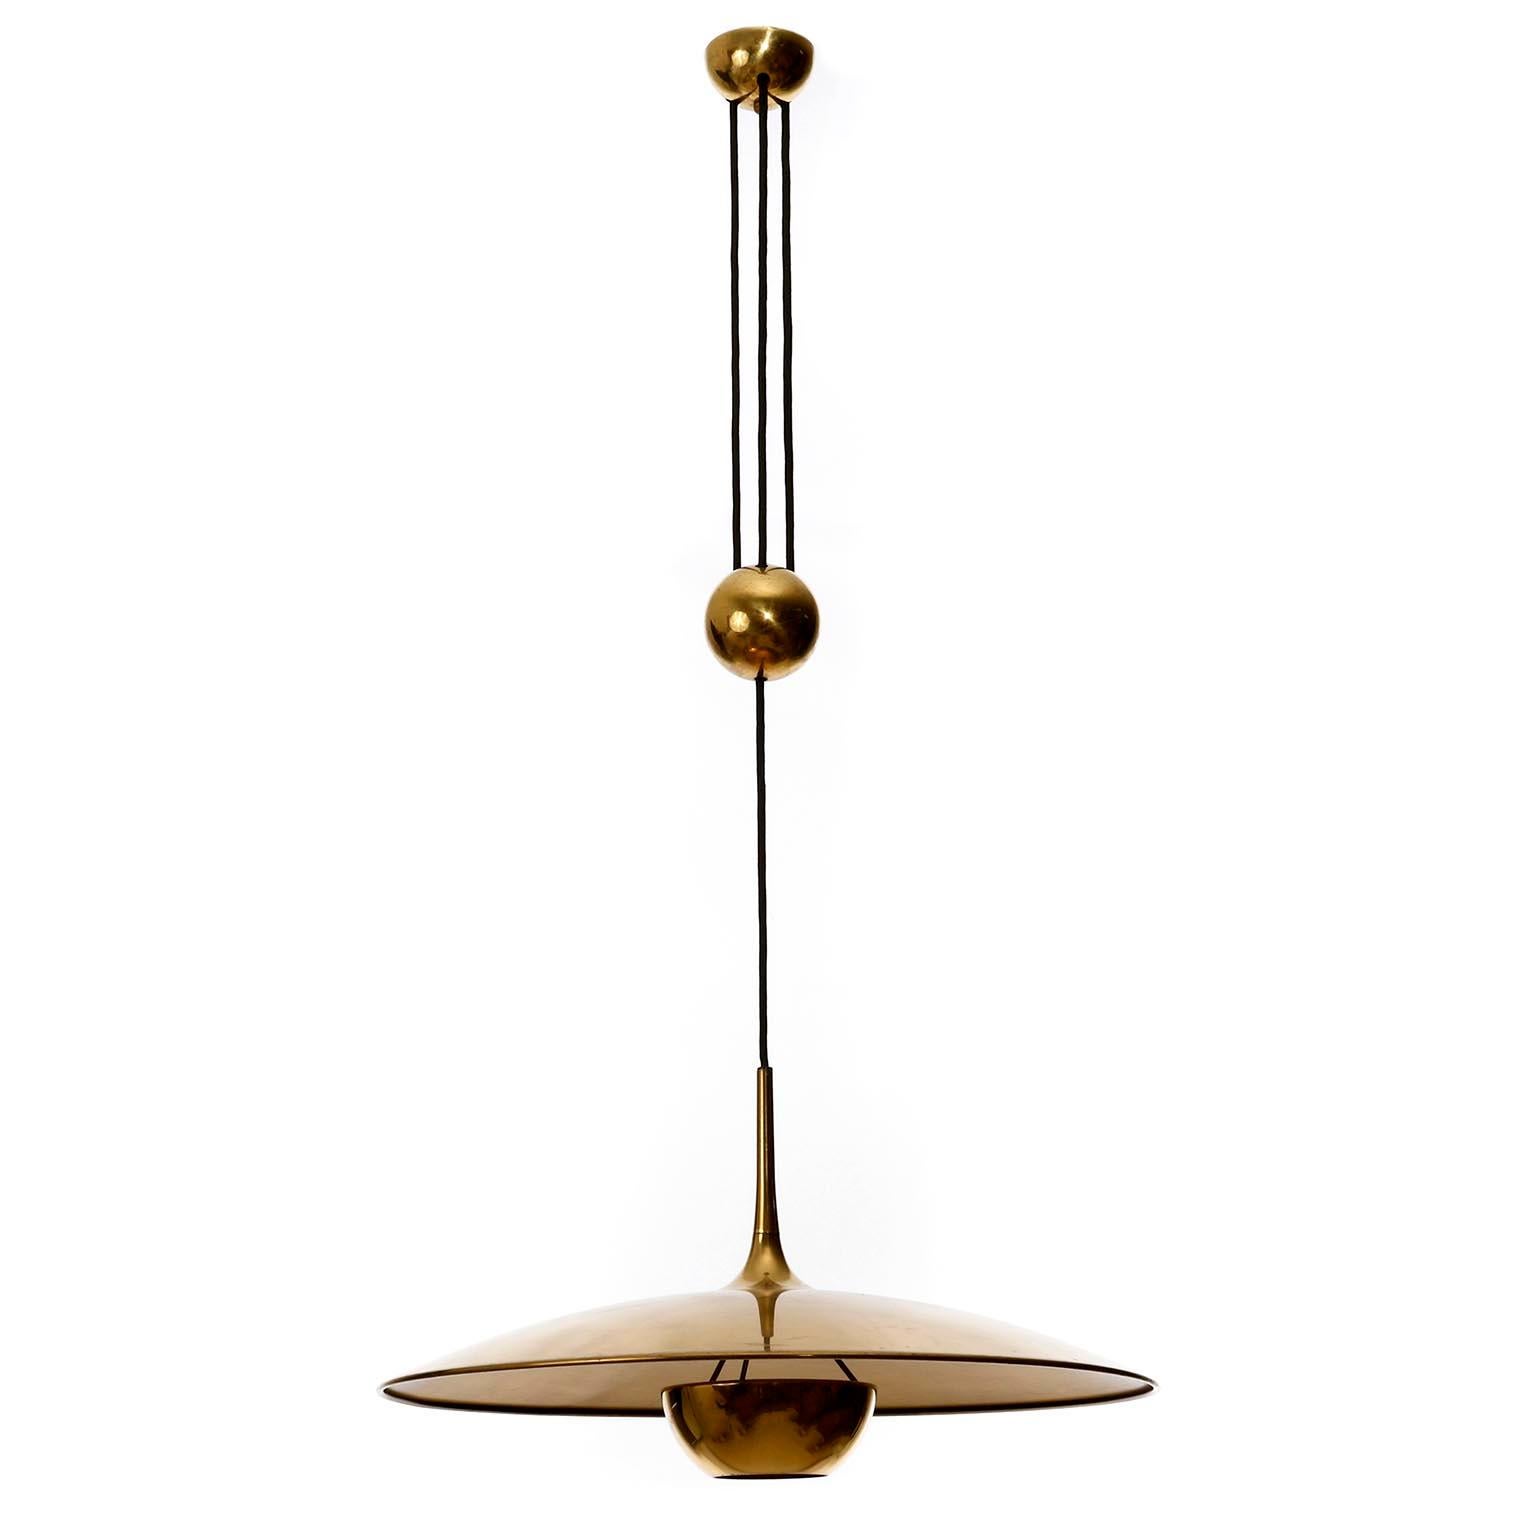 A height adjustable pendant lamp by Florian Schulz, Germany, manufactured in midcentury, circa 1970 (late 1960s-early 1970s).
The fixture is made of solid brass with a polished and aged surface in a rich and warm tone with patina and little wear of